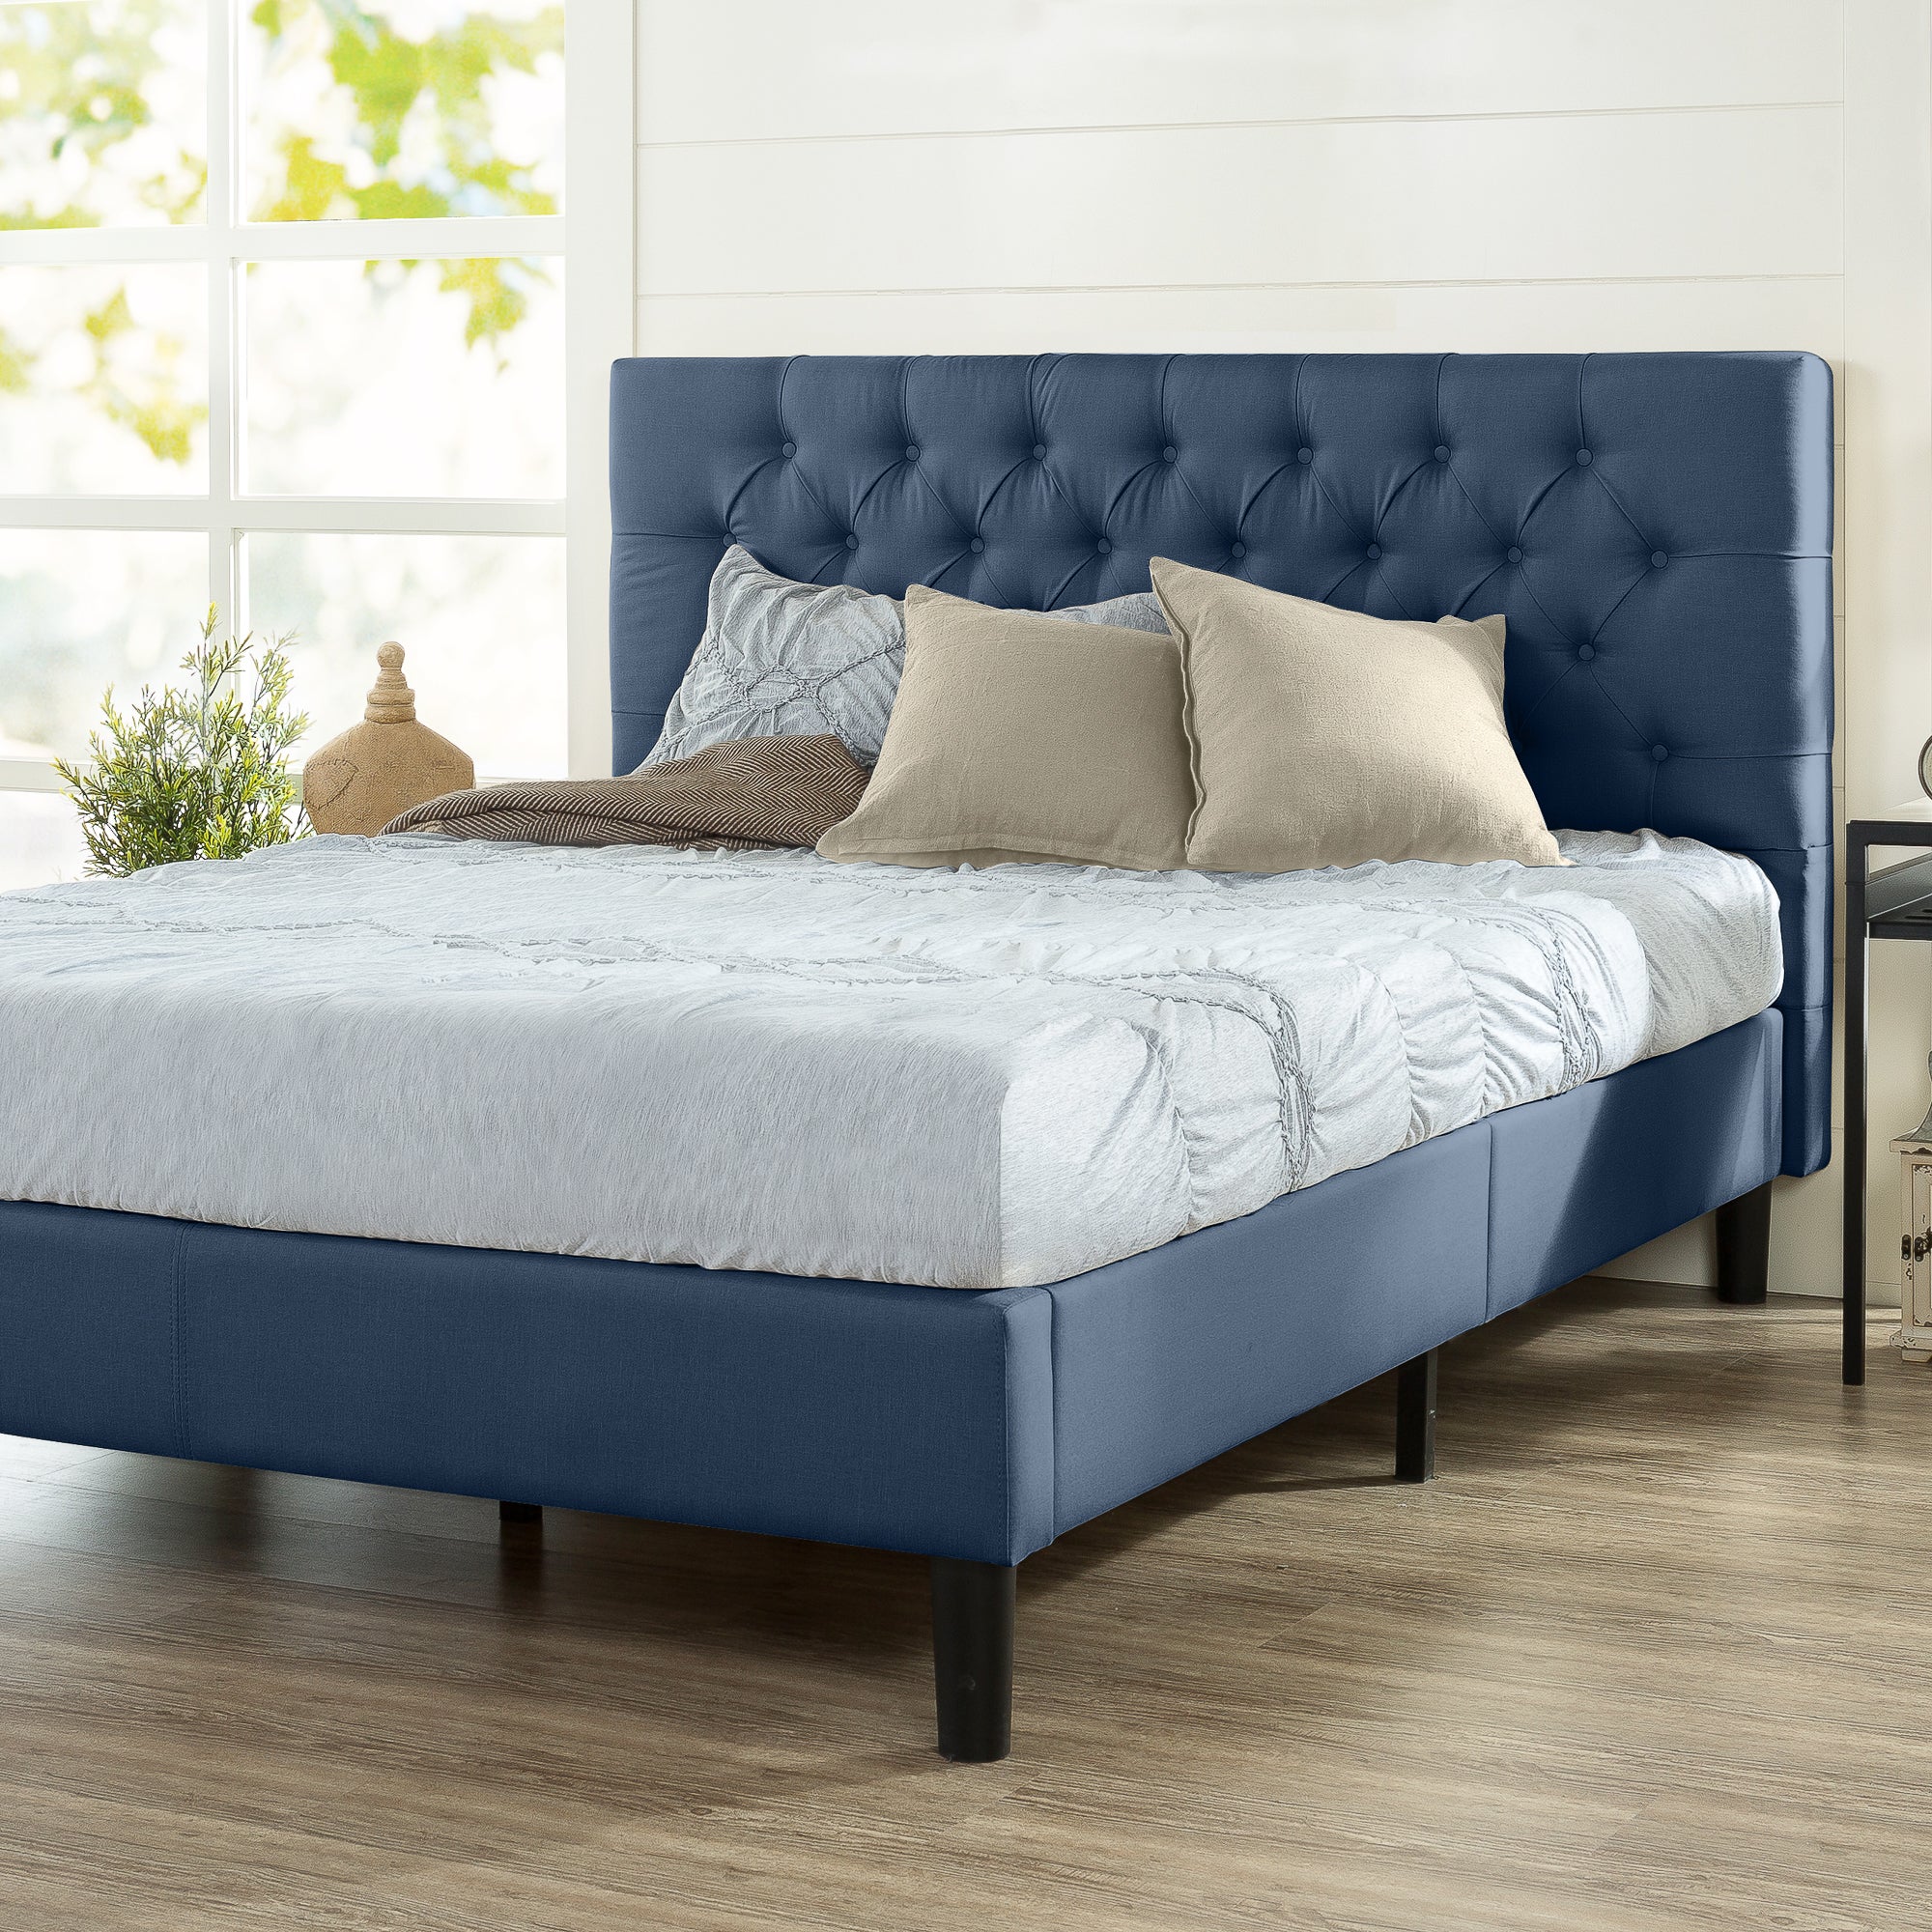 Zinus Misty Fabric Bed Frame Upholstered Button Tufted Fabric Platform Double Queen Size